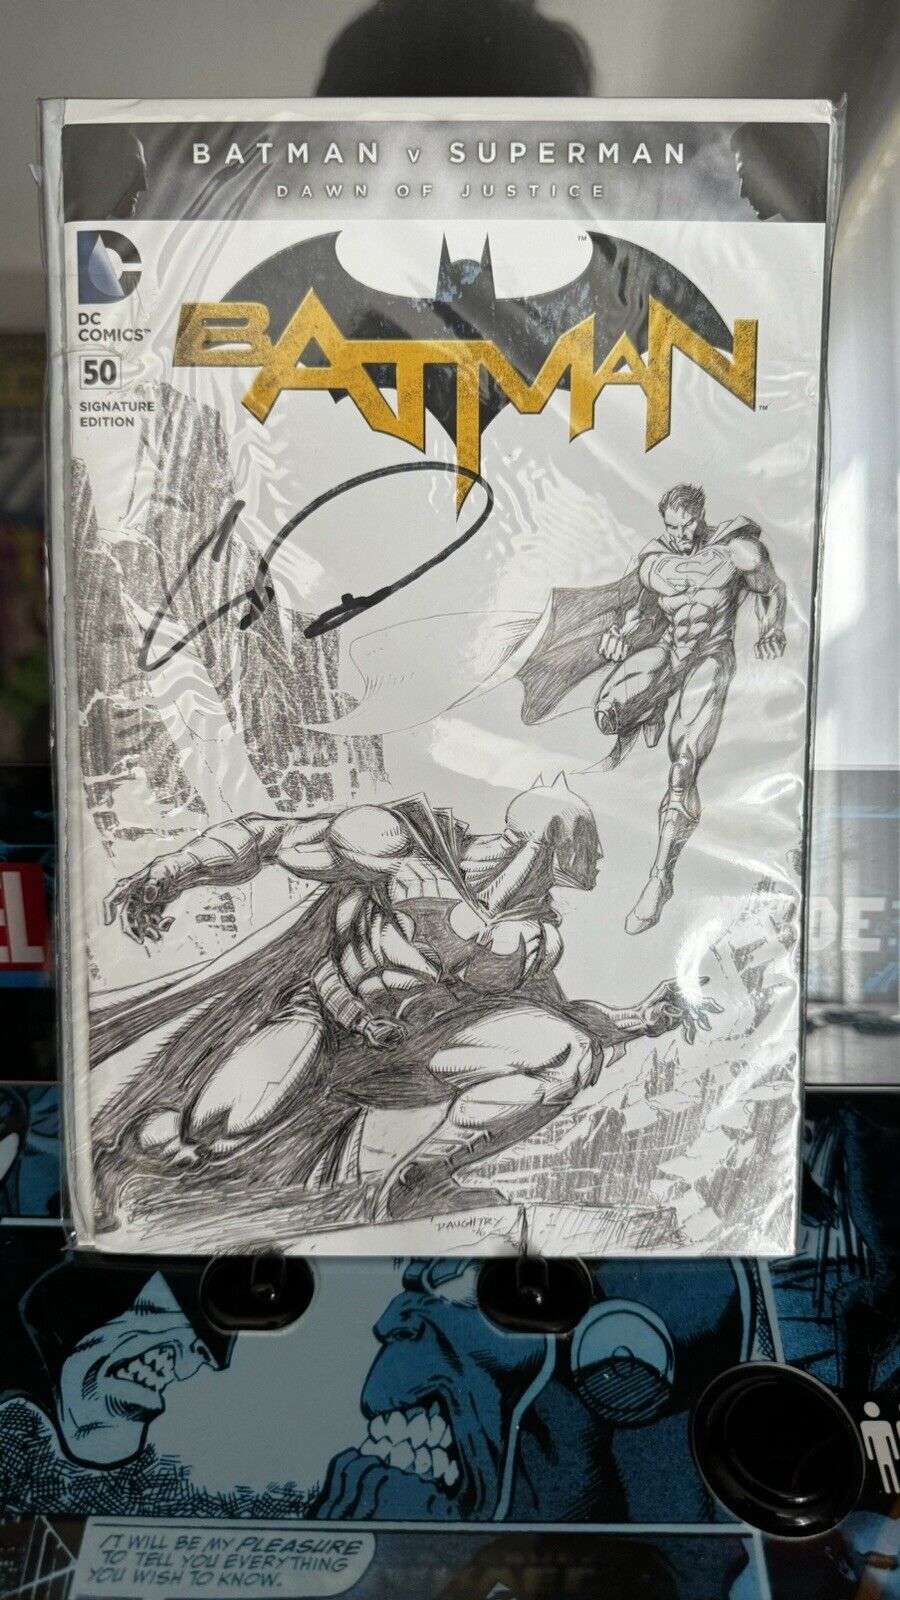 Batman (2011) 50 RARE Signature Edition Sketch Variant signed by Chris Daughtry